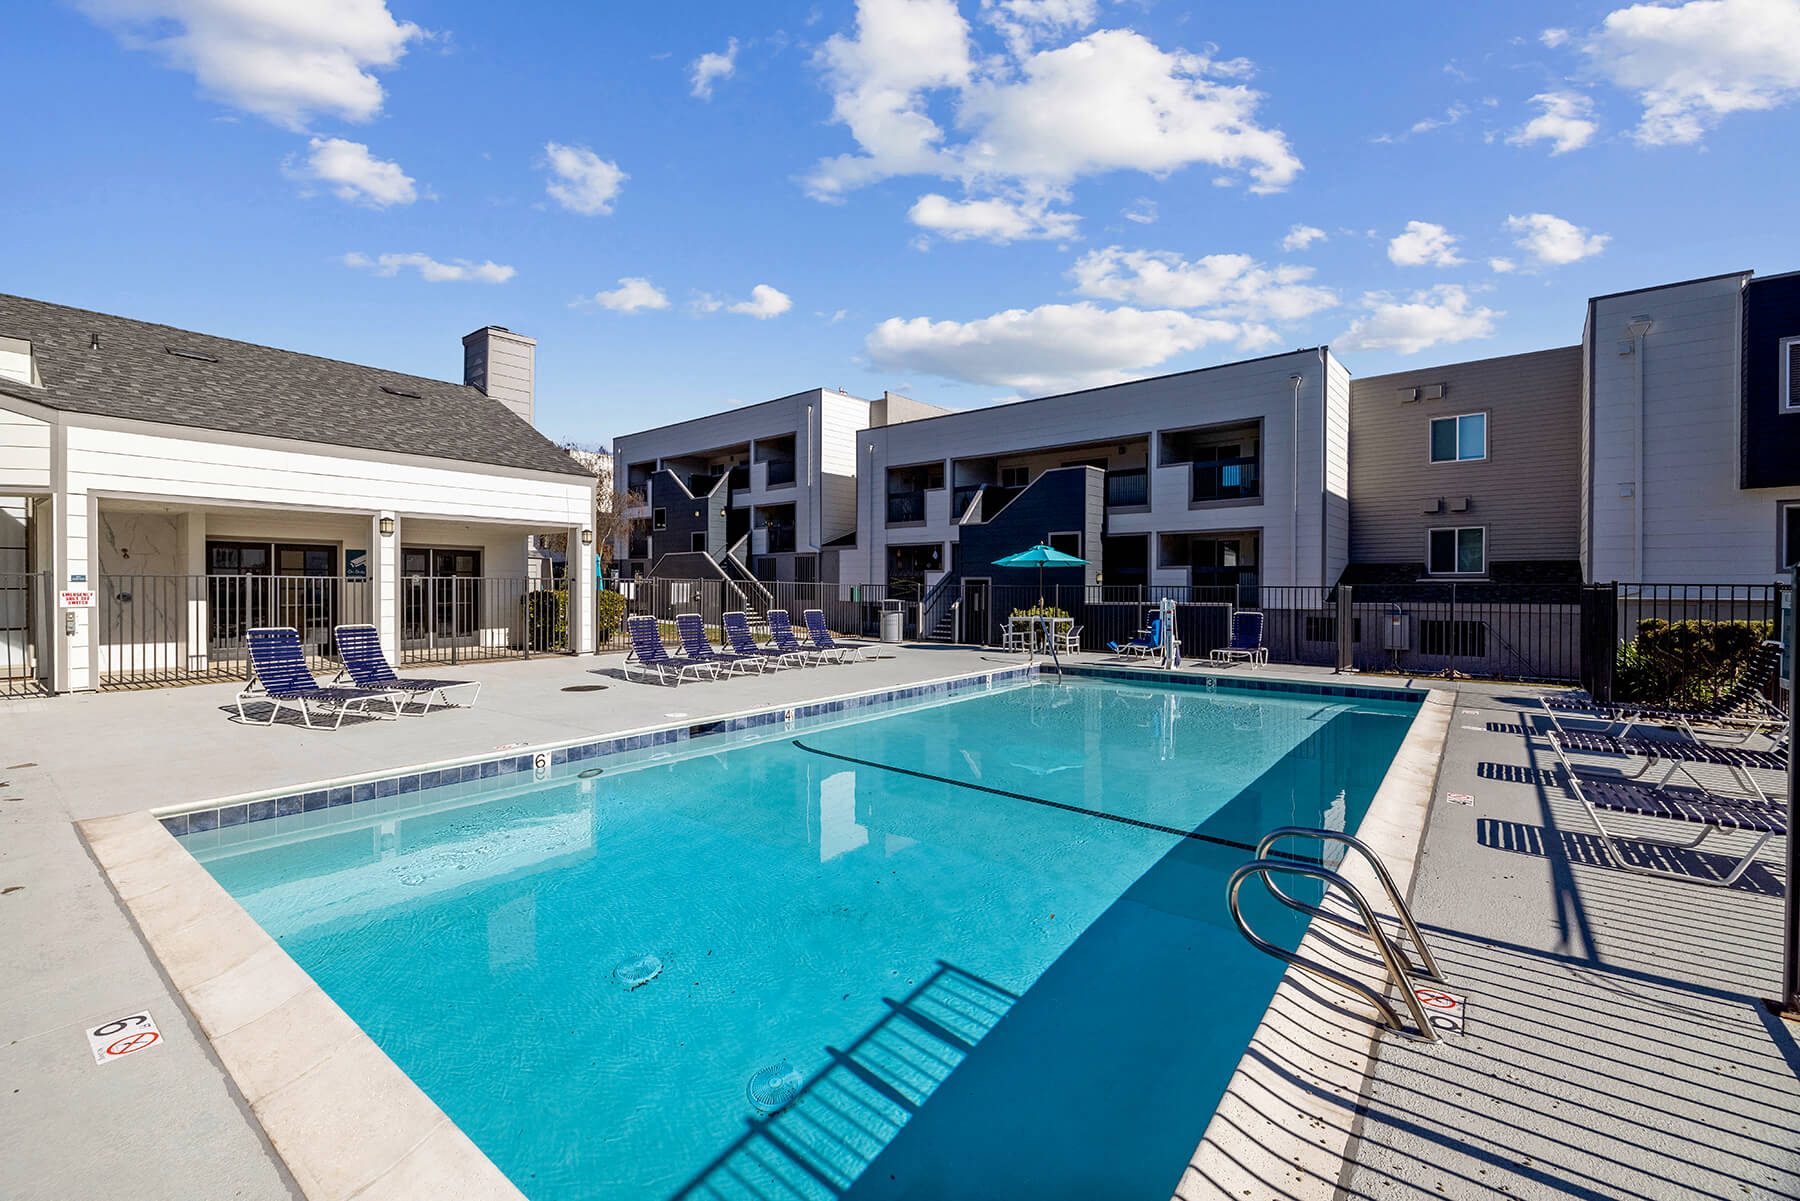 The community pool and clubhouse at the Hilltop Commons Apartments in San Pablo, California.